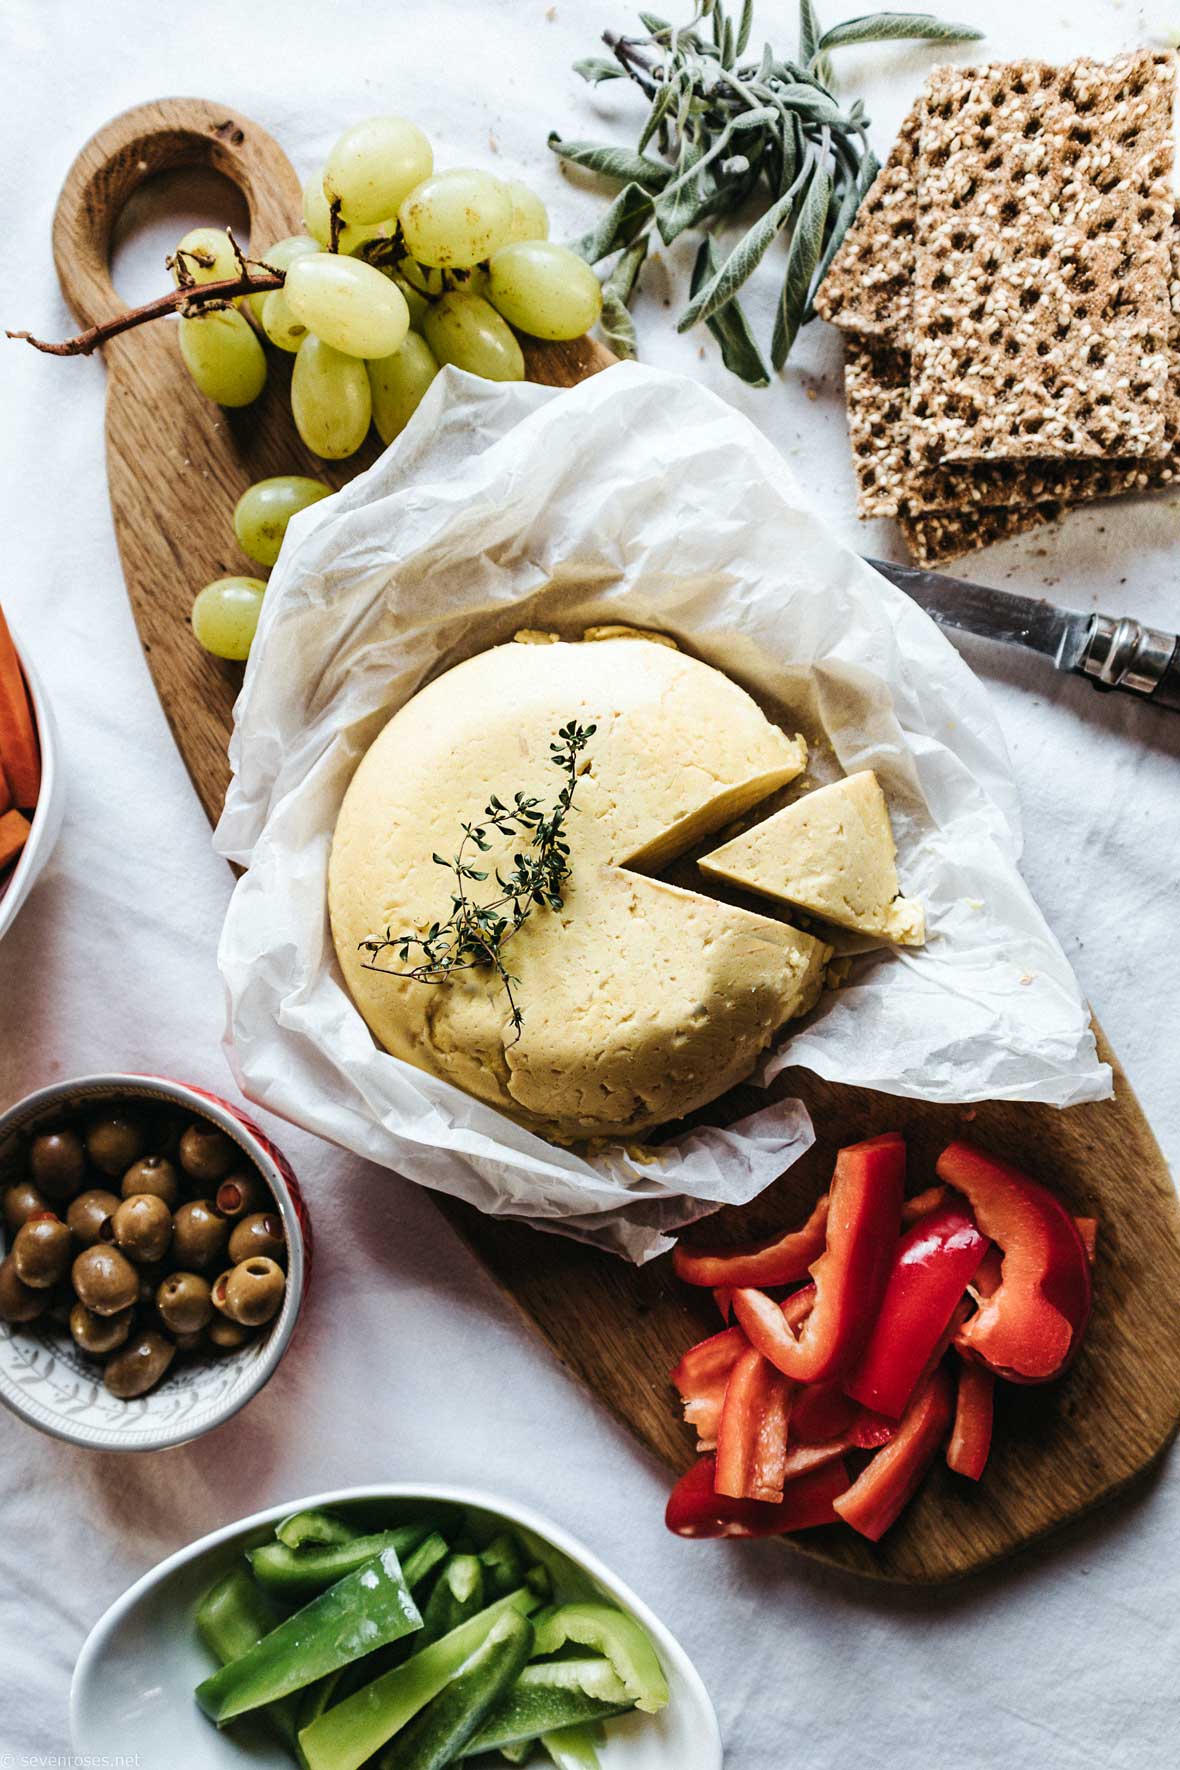 Vegan cheese made with chickpea flour